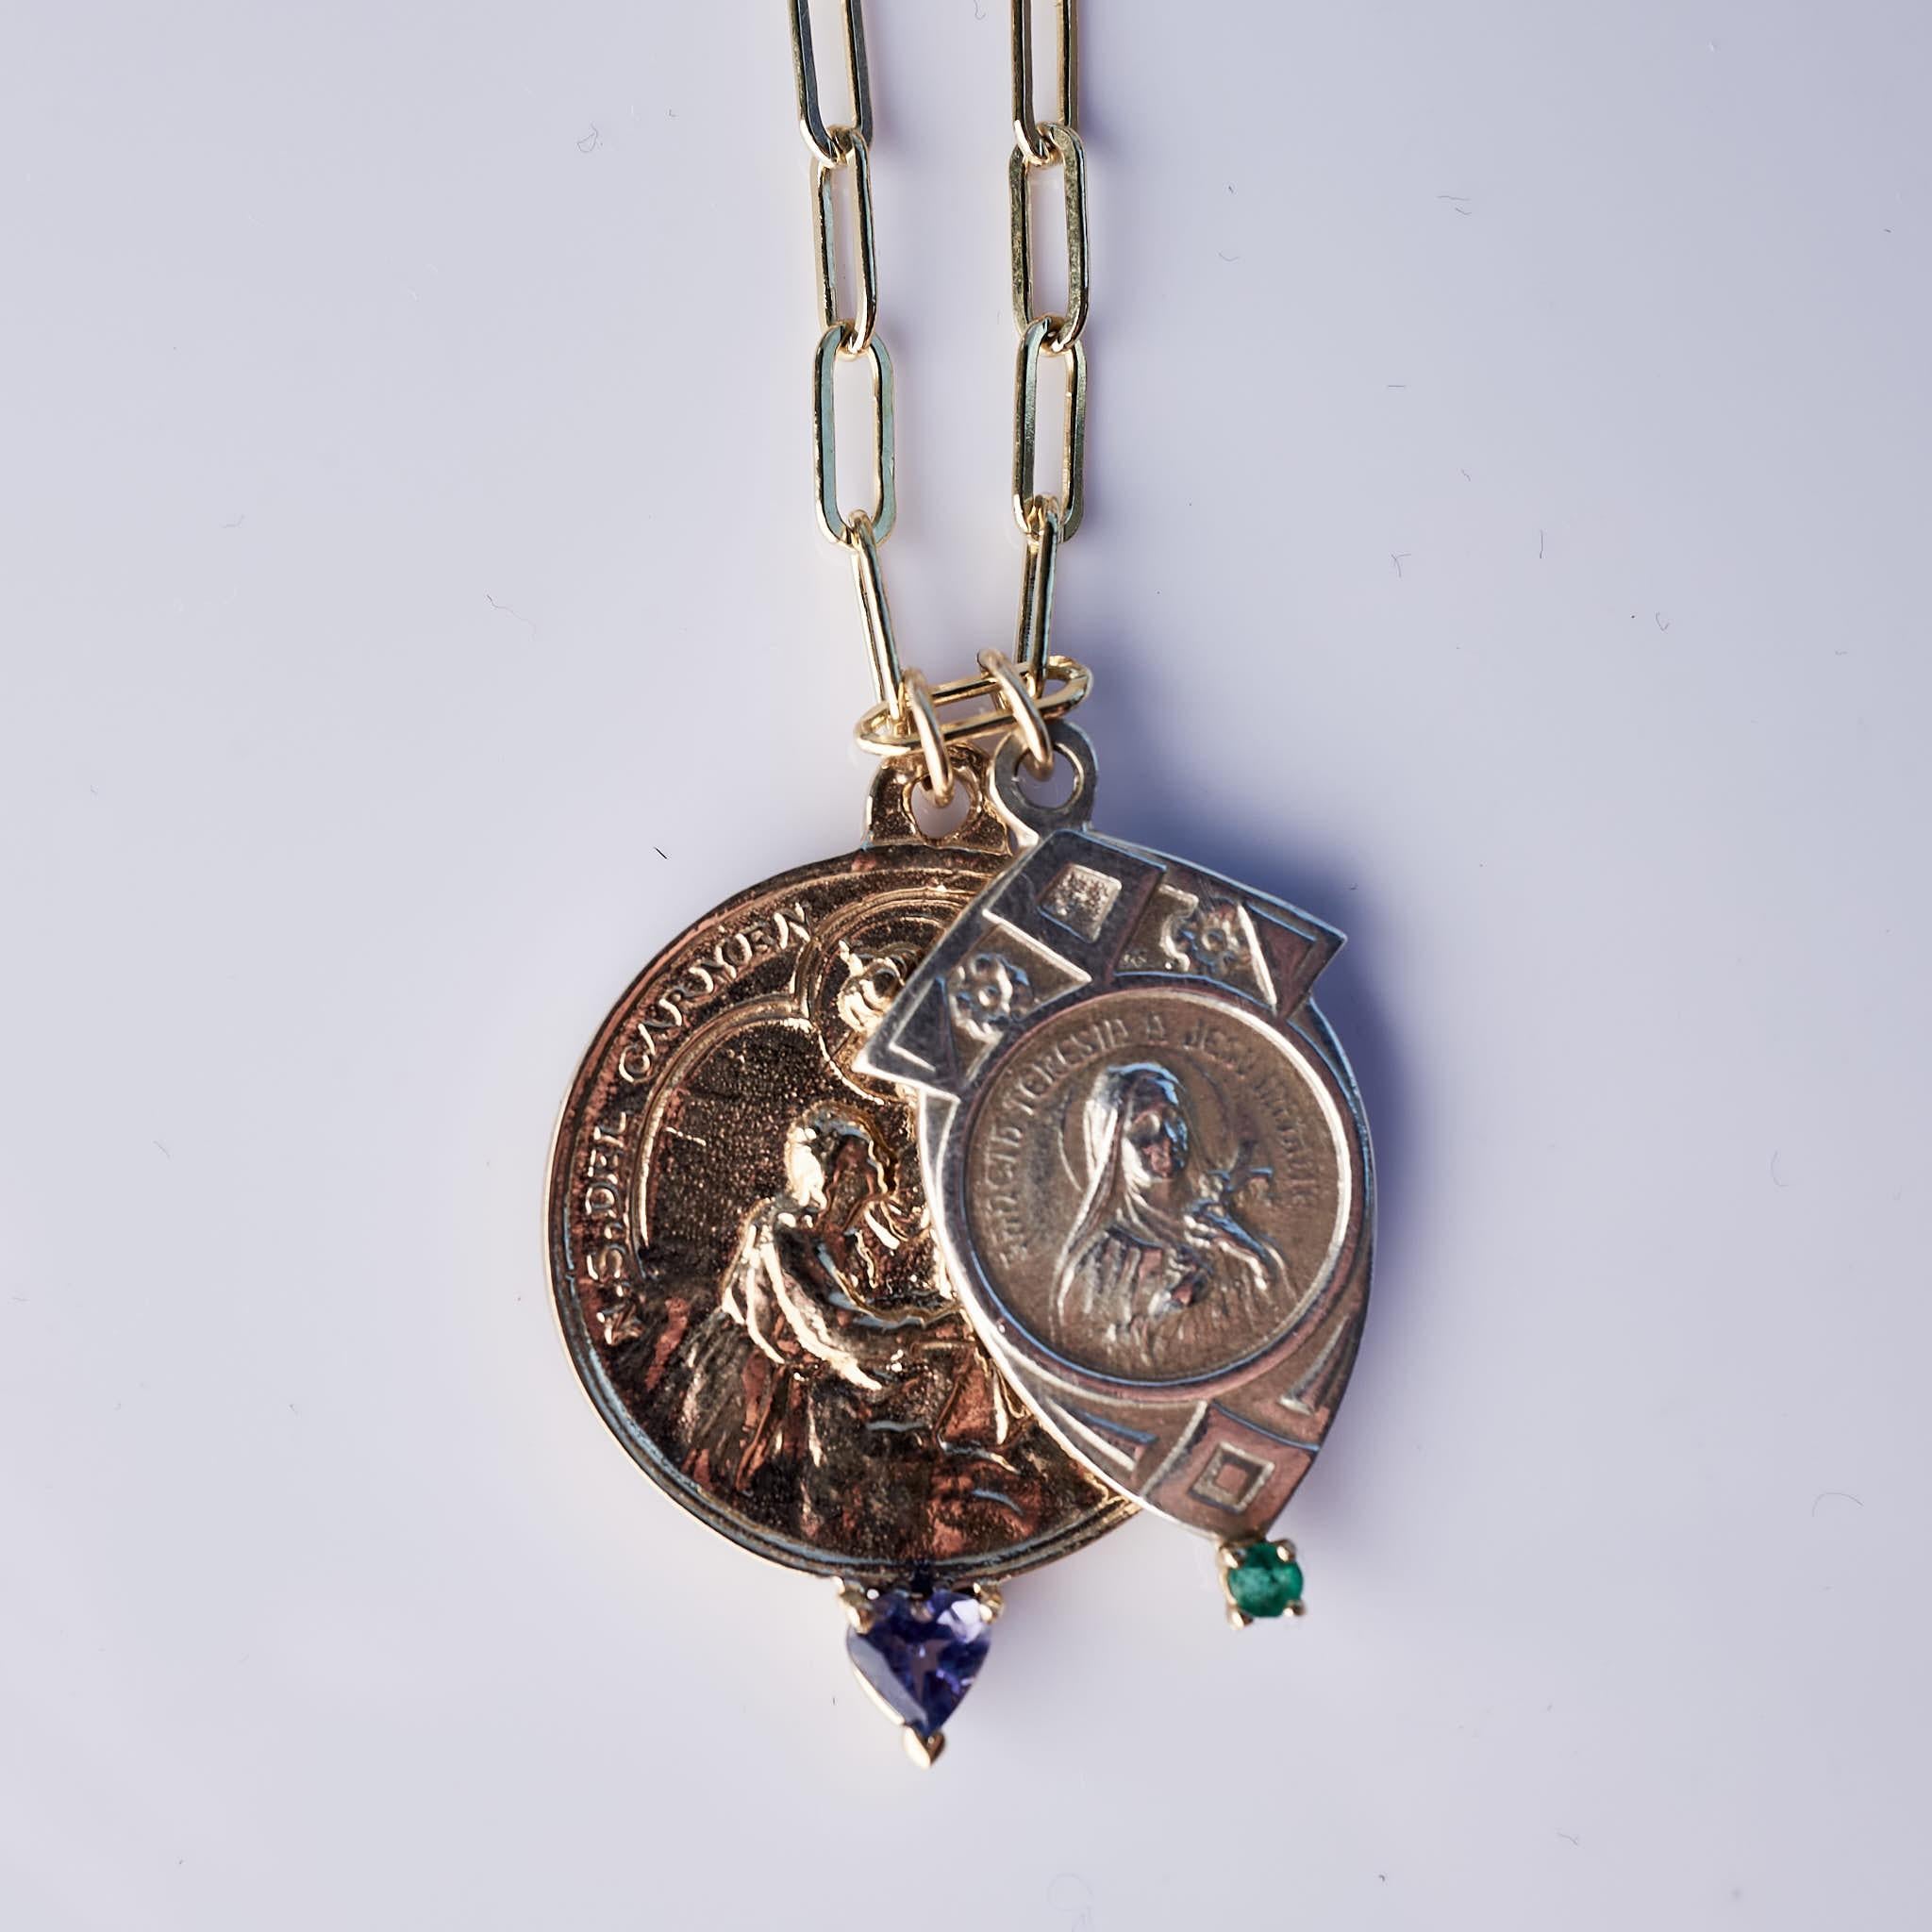 This Double Medal Necklace with two Virgin Mary Medals hangs on a Gold Filled Chain. One of the medals is round in bronze and has a gold set Heart Tanzanite, the other Medal is in sterling silver and has a gold set Emerald.
The  Necklace can be used